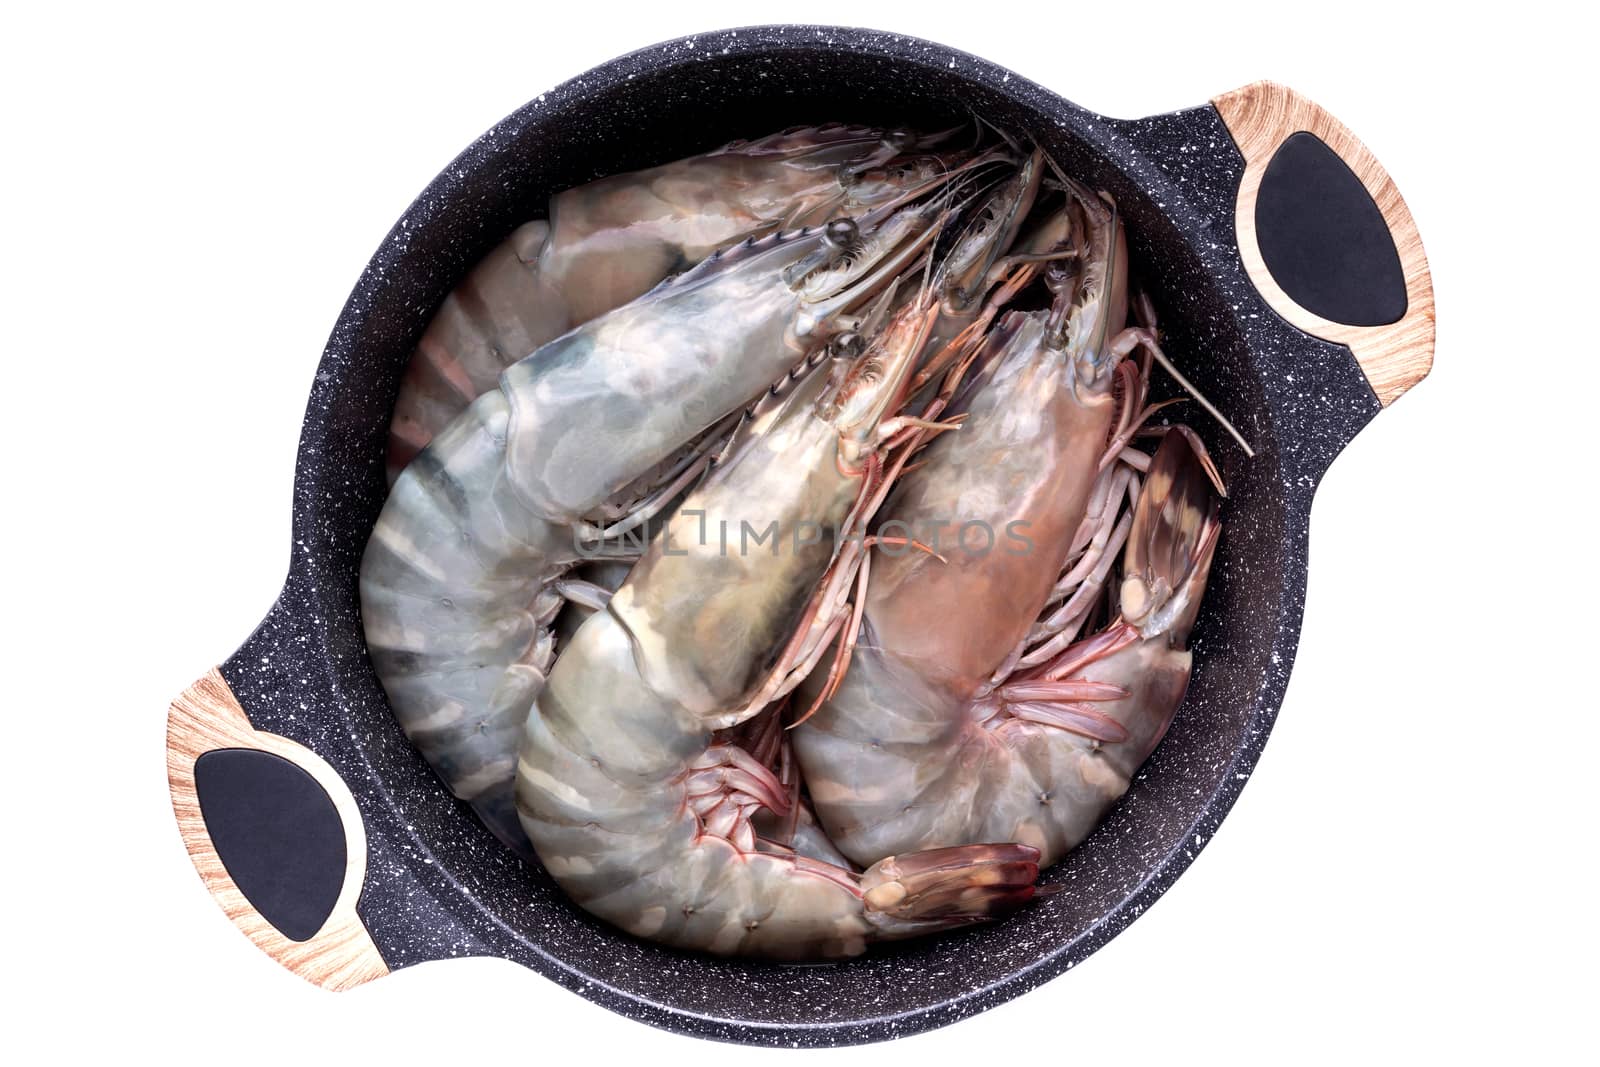 homemade raw salt-baked shrimp or prawn in pot to be cooked, healthy gourmet food recipe, good work from home lunch idea